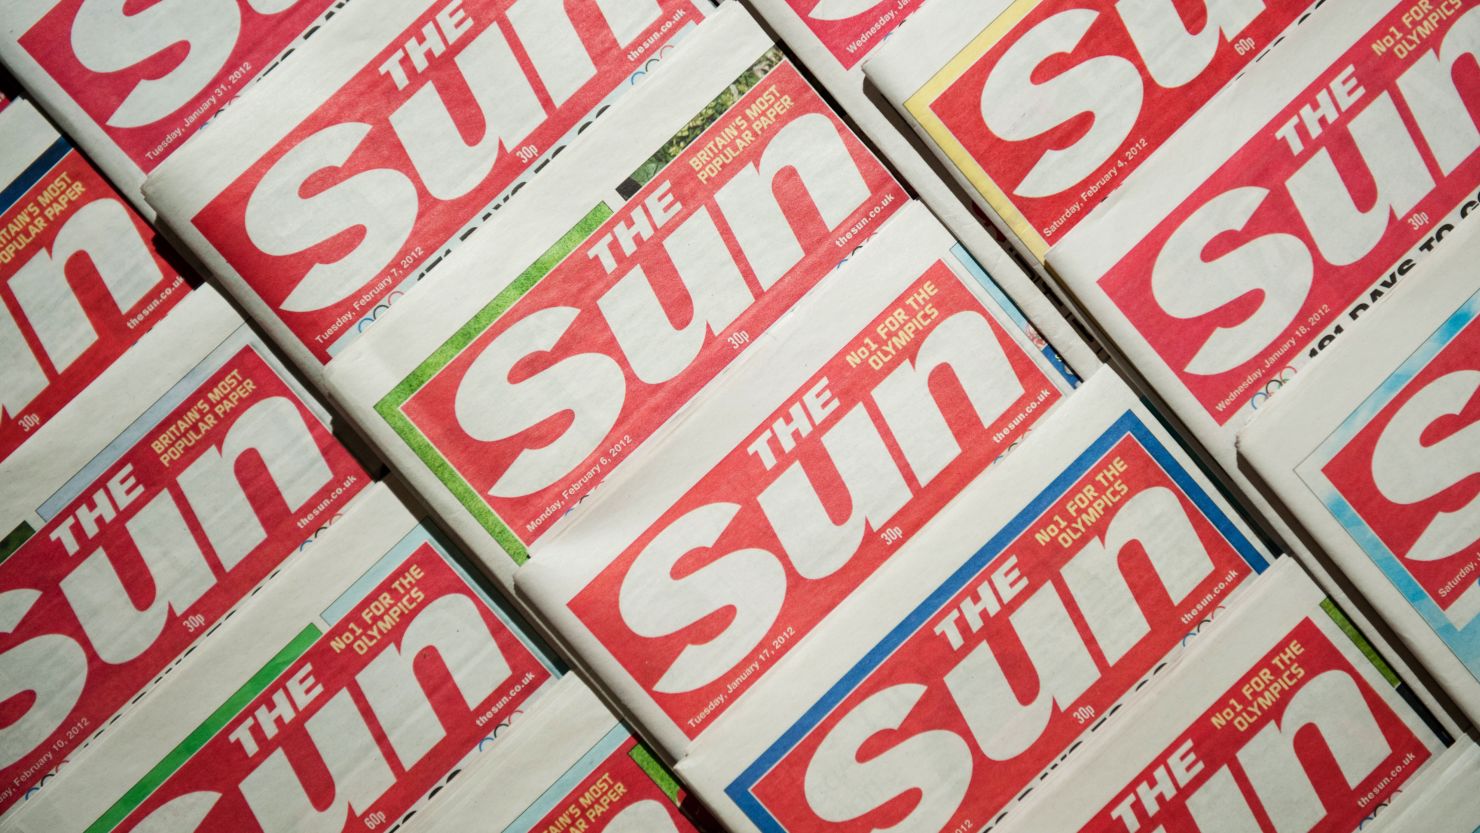 Rupert Murdoch has announced plans for a Sunday edition of his company's UK newspaper The Sun.